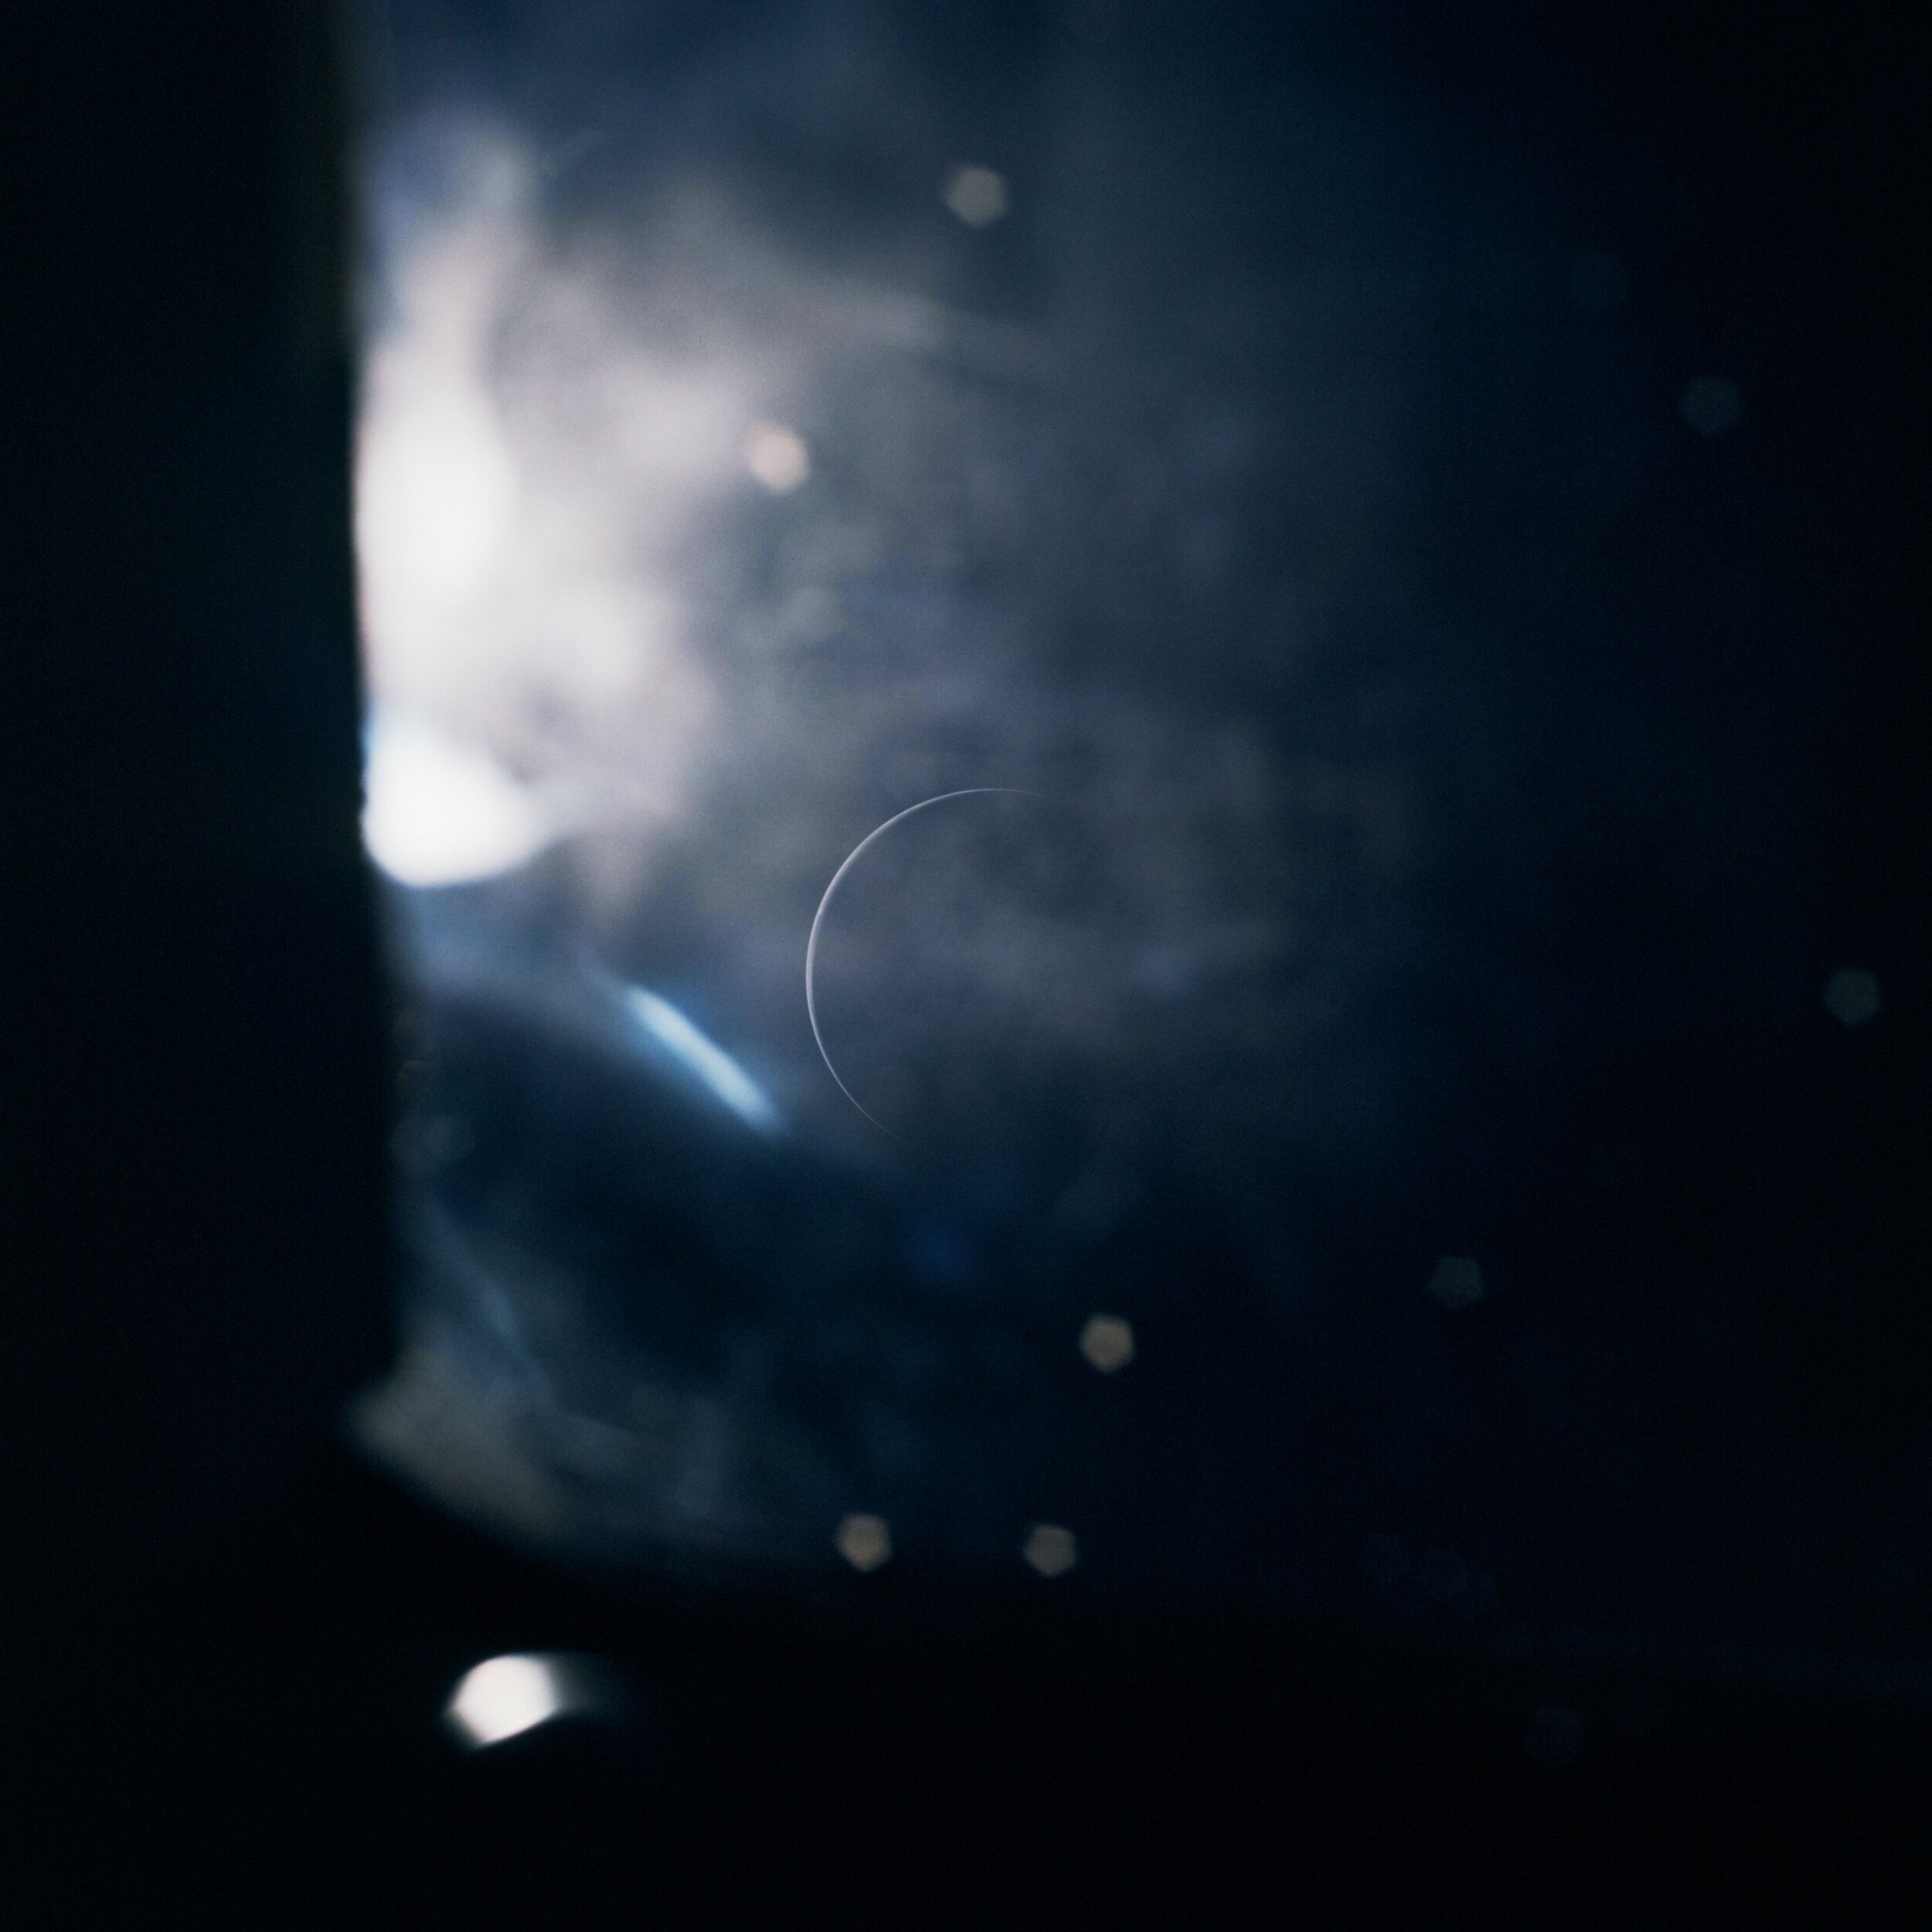  Apollo 15  A slender crescent Earth seen through the grime and reflections of a Command Module window. Taken by the crew of Apollo 15 on their journey home.   Full Resolution   Date – 7 August 1971 Lens – Zeiss UV Sonnar ƒ-4.3/105mm Code – AS15-96-1